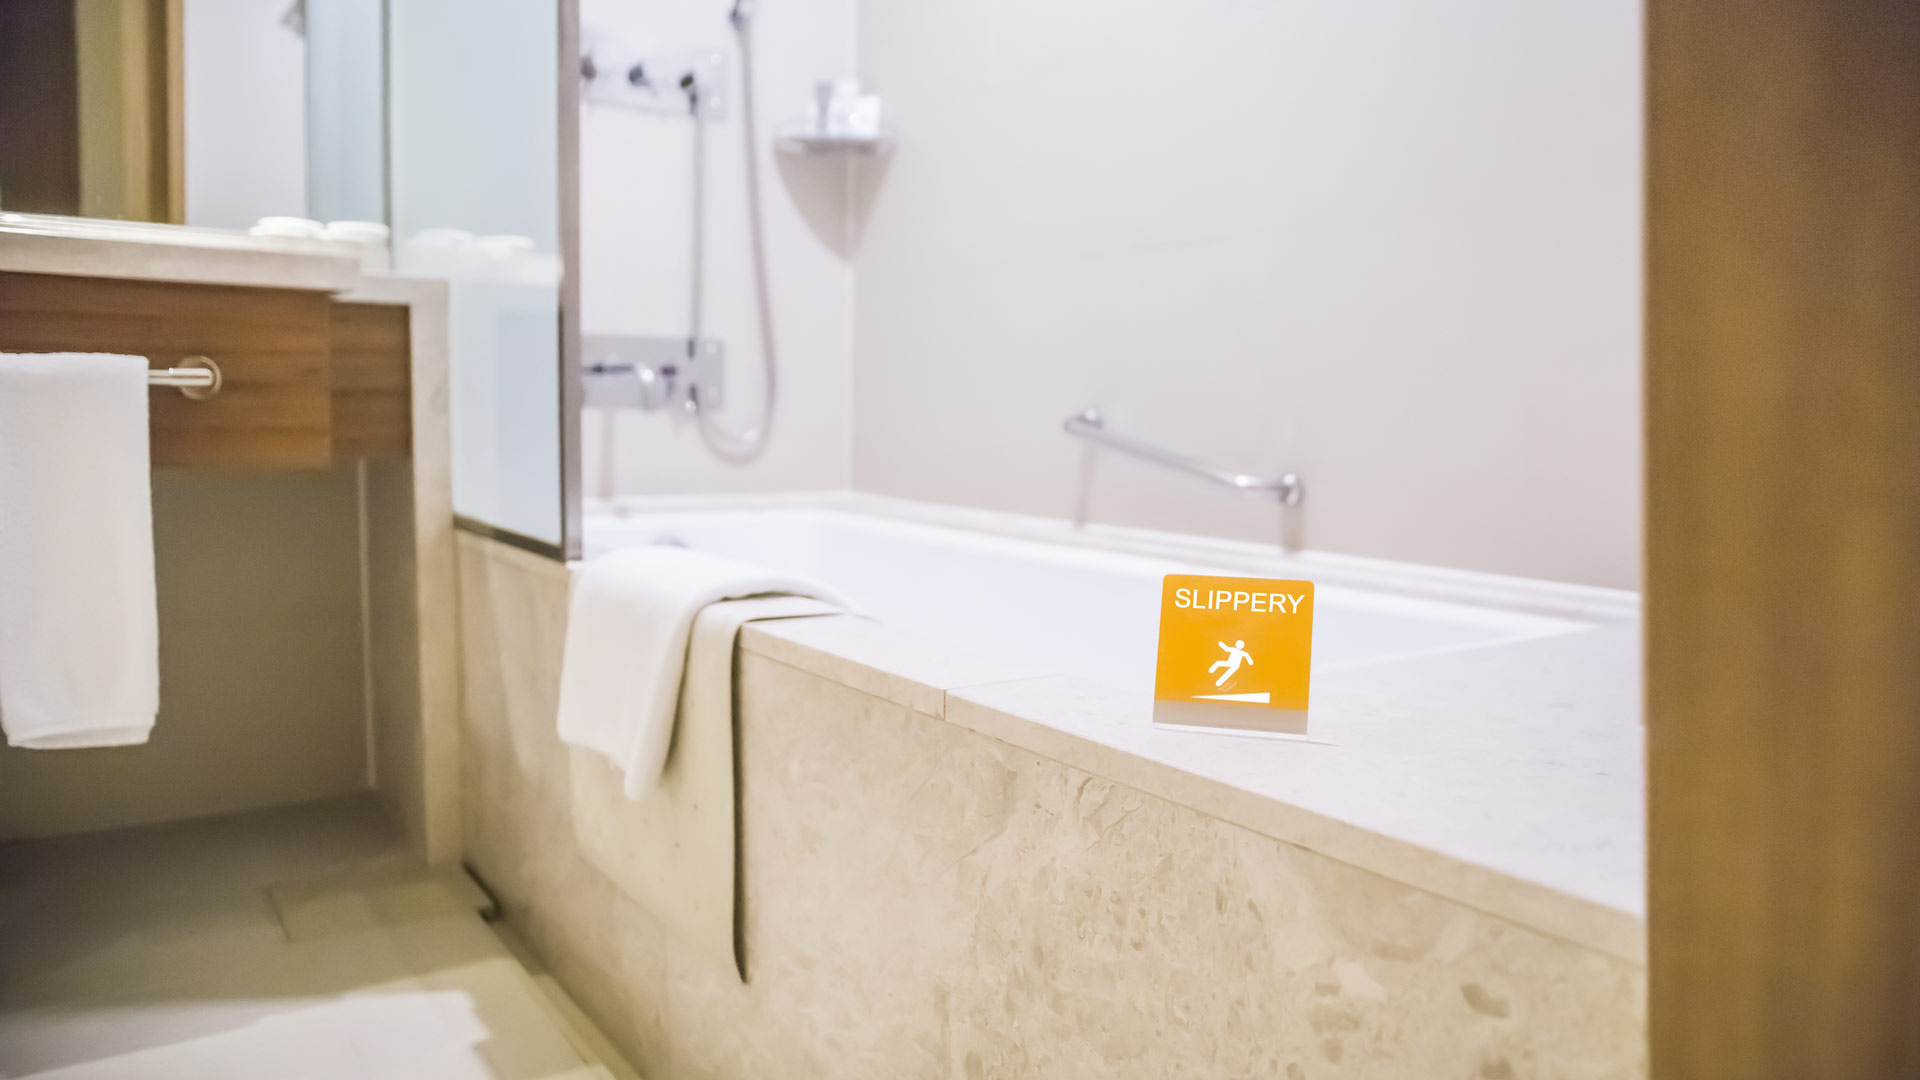 Affordable and high-quality hotel bath repairs.